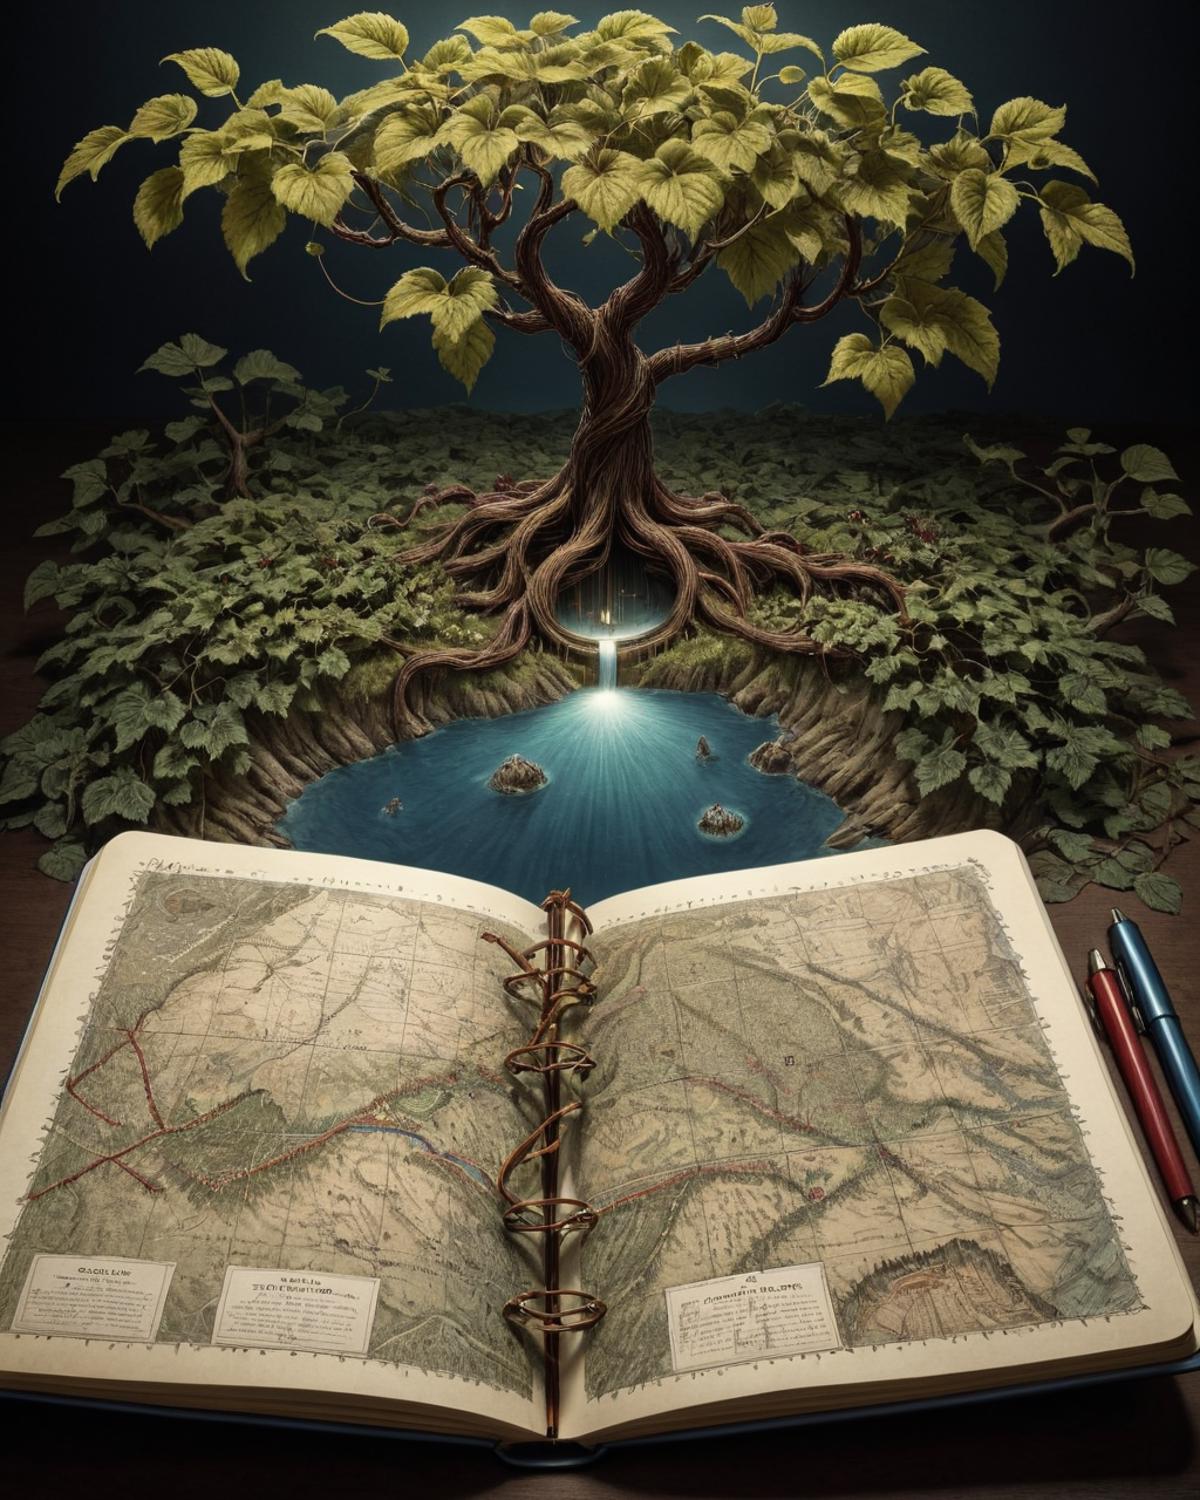 A book with a map and an illustration of a tree inside it.